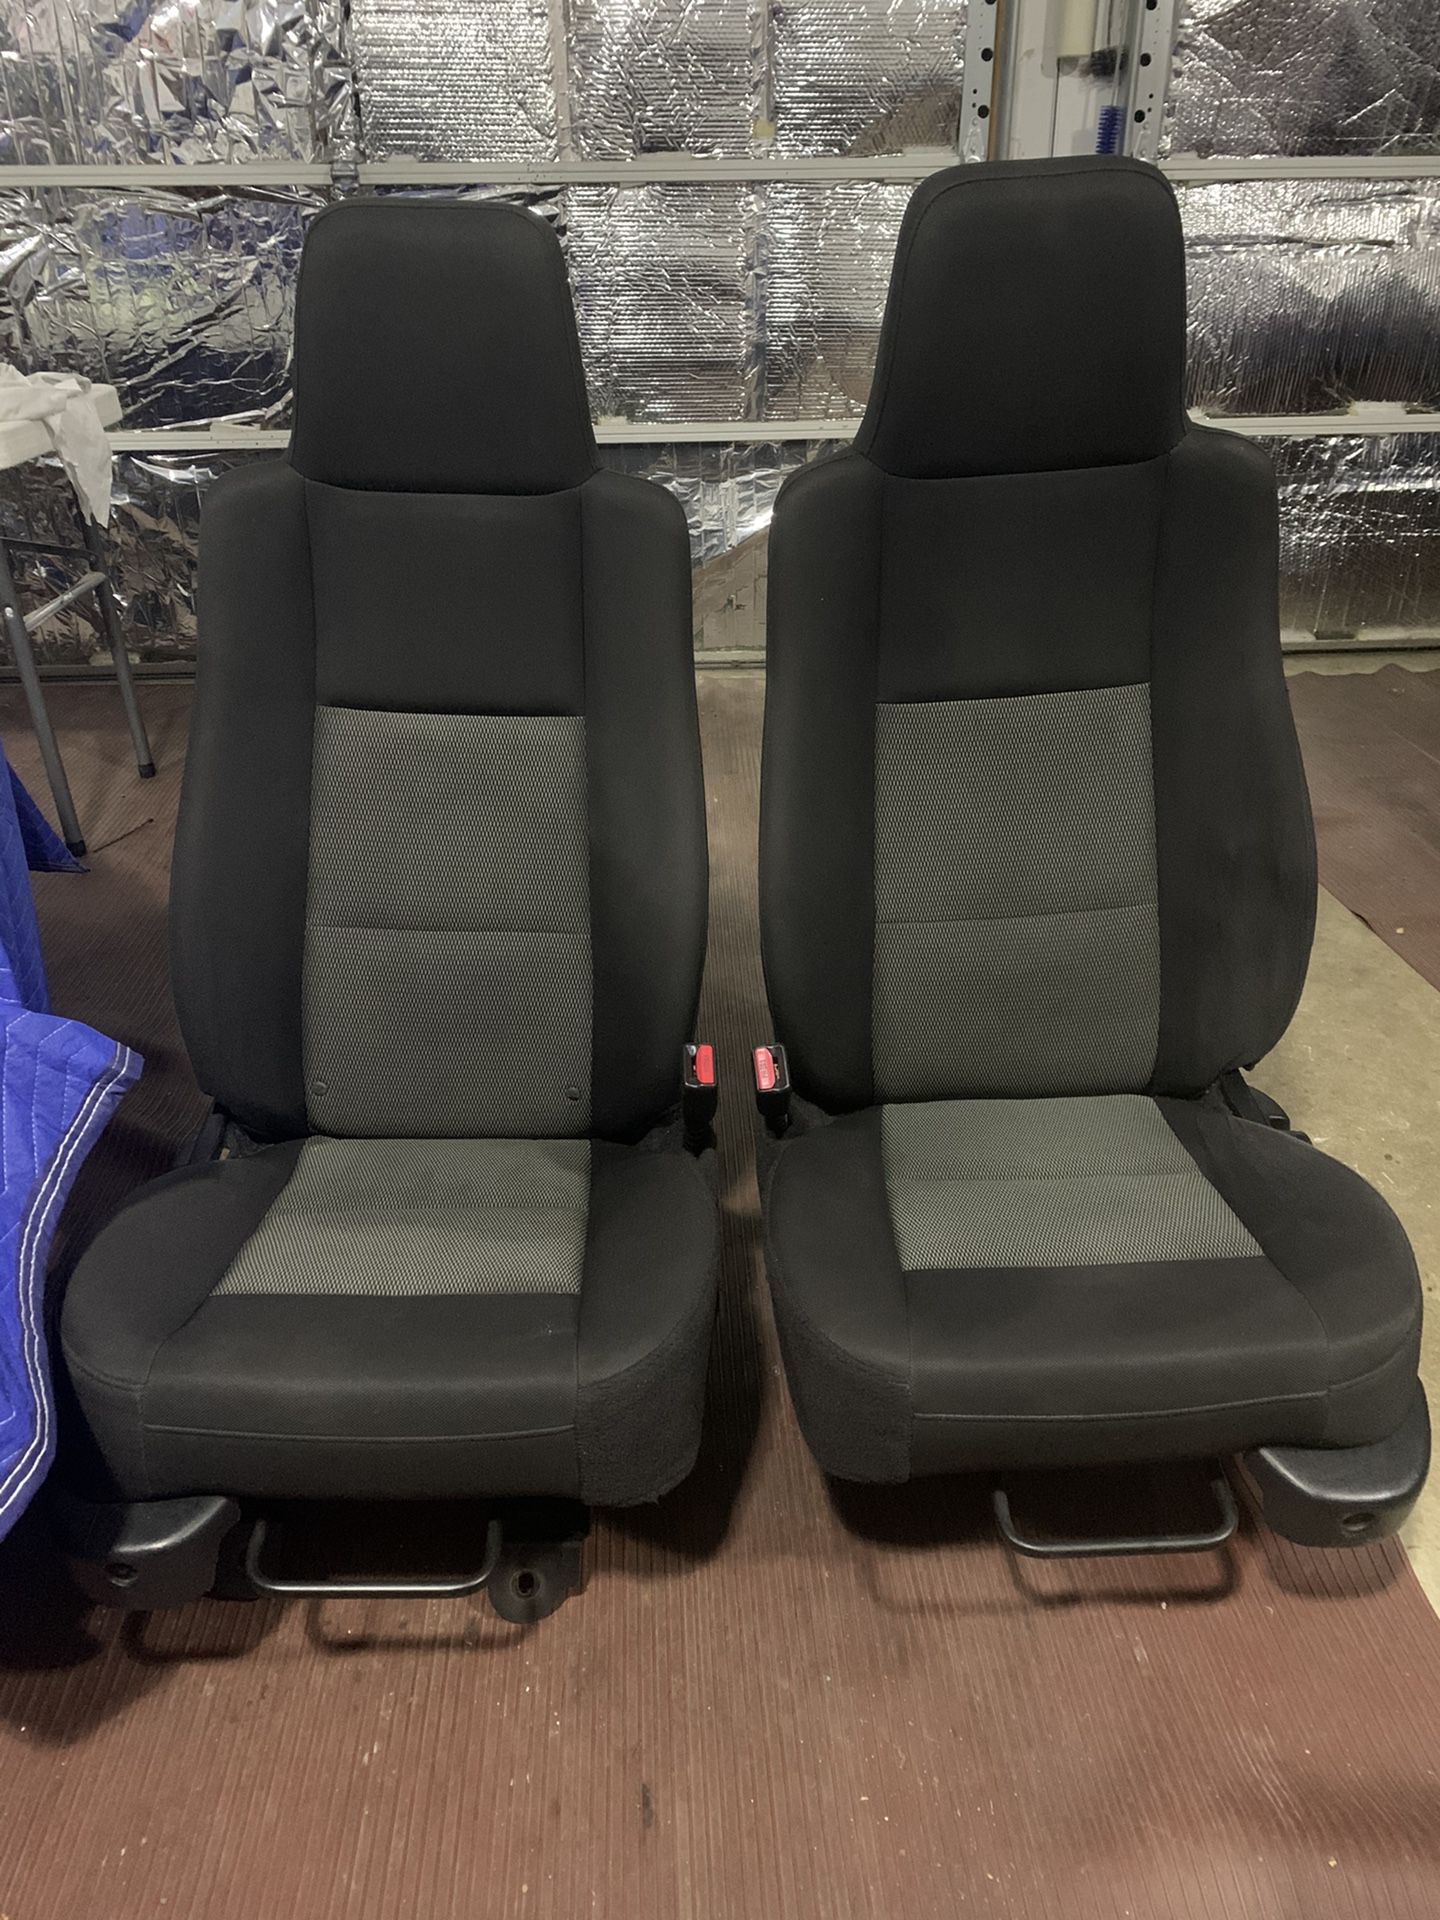 Front seats passenger and driver 2004 Ford Ranger extended cab!!